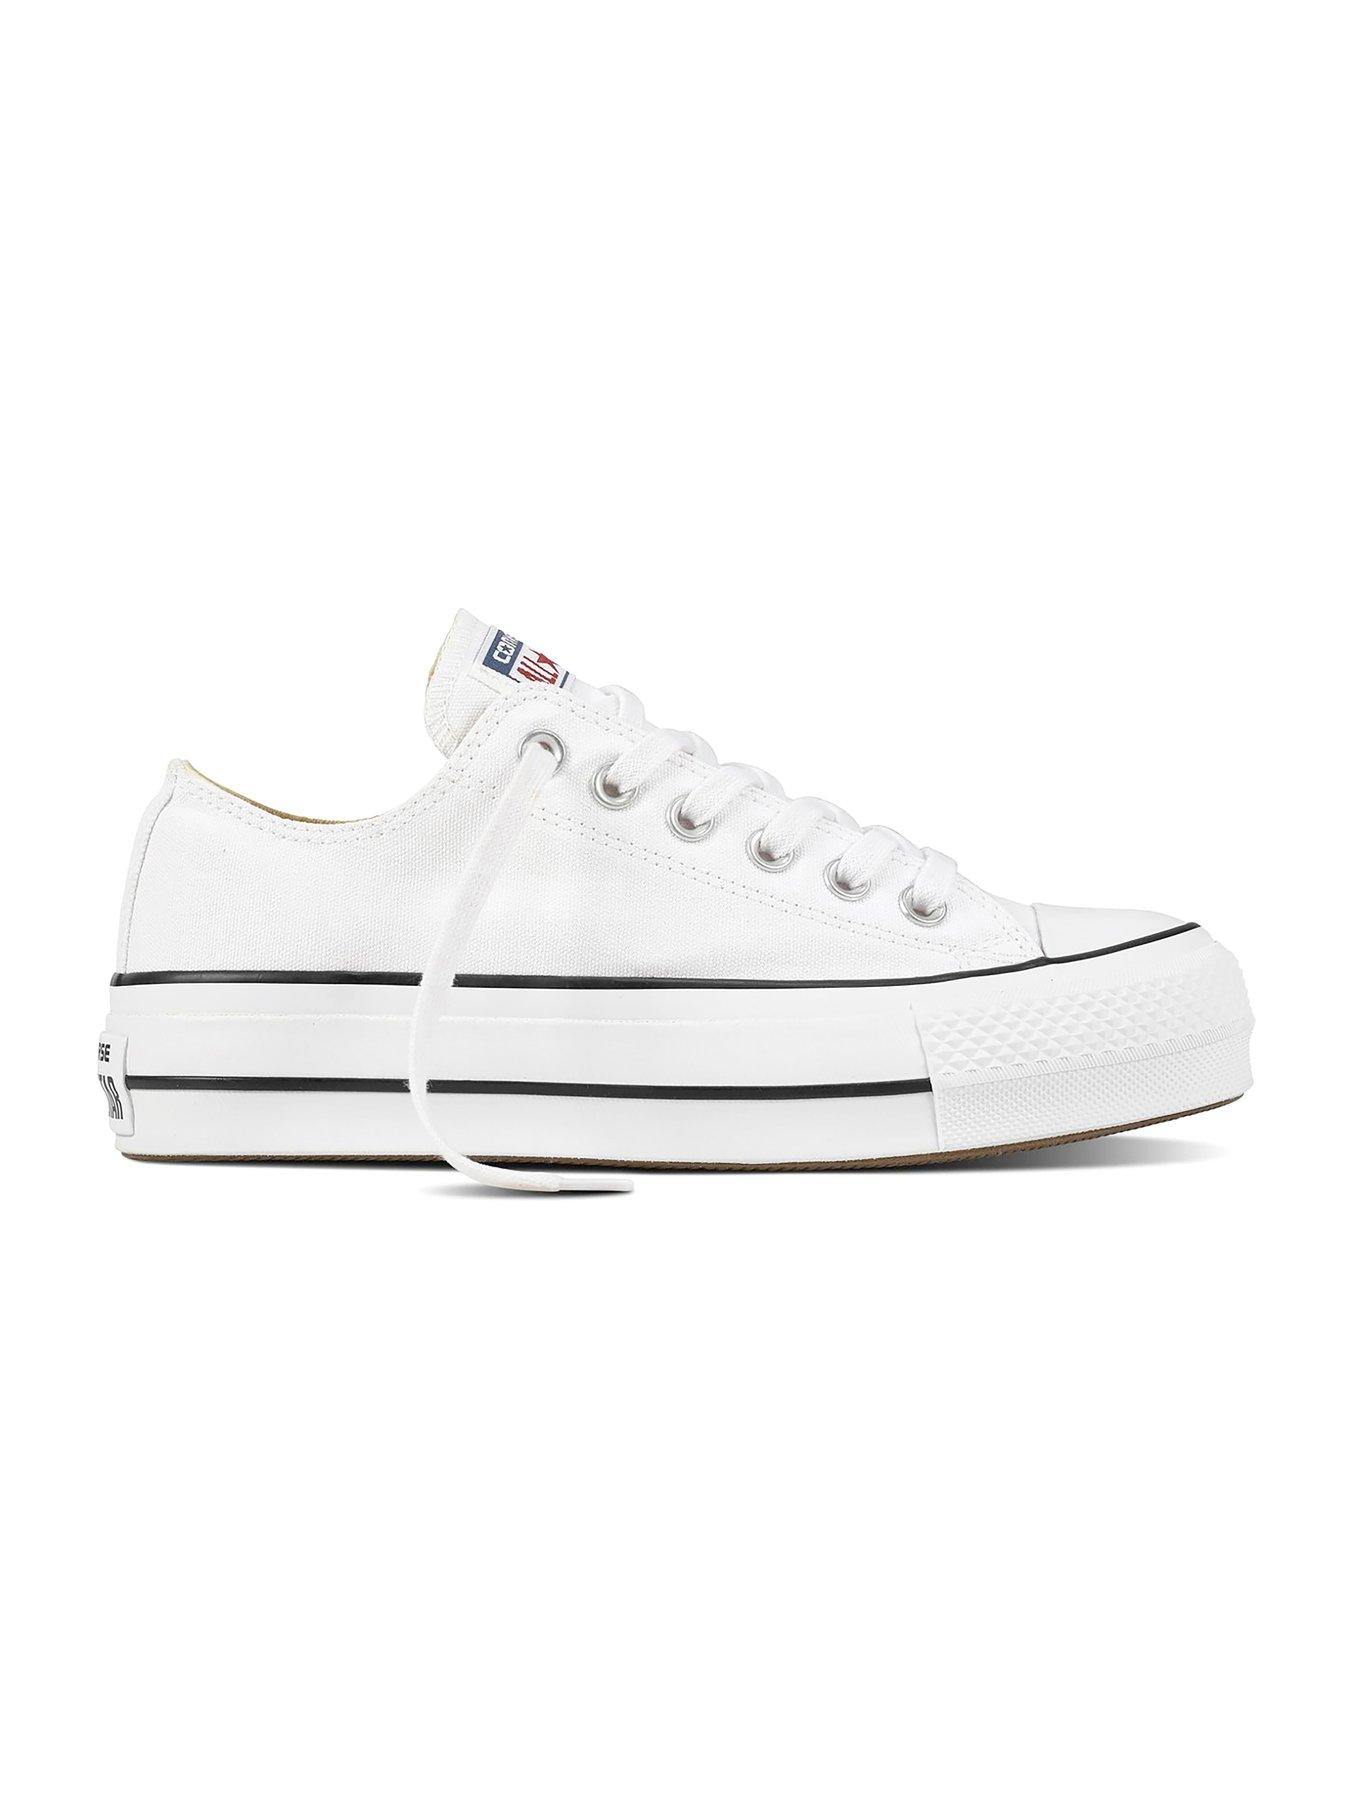 womens converse white all star oxford trainers